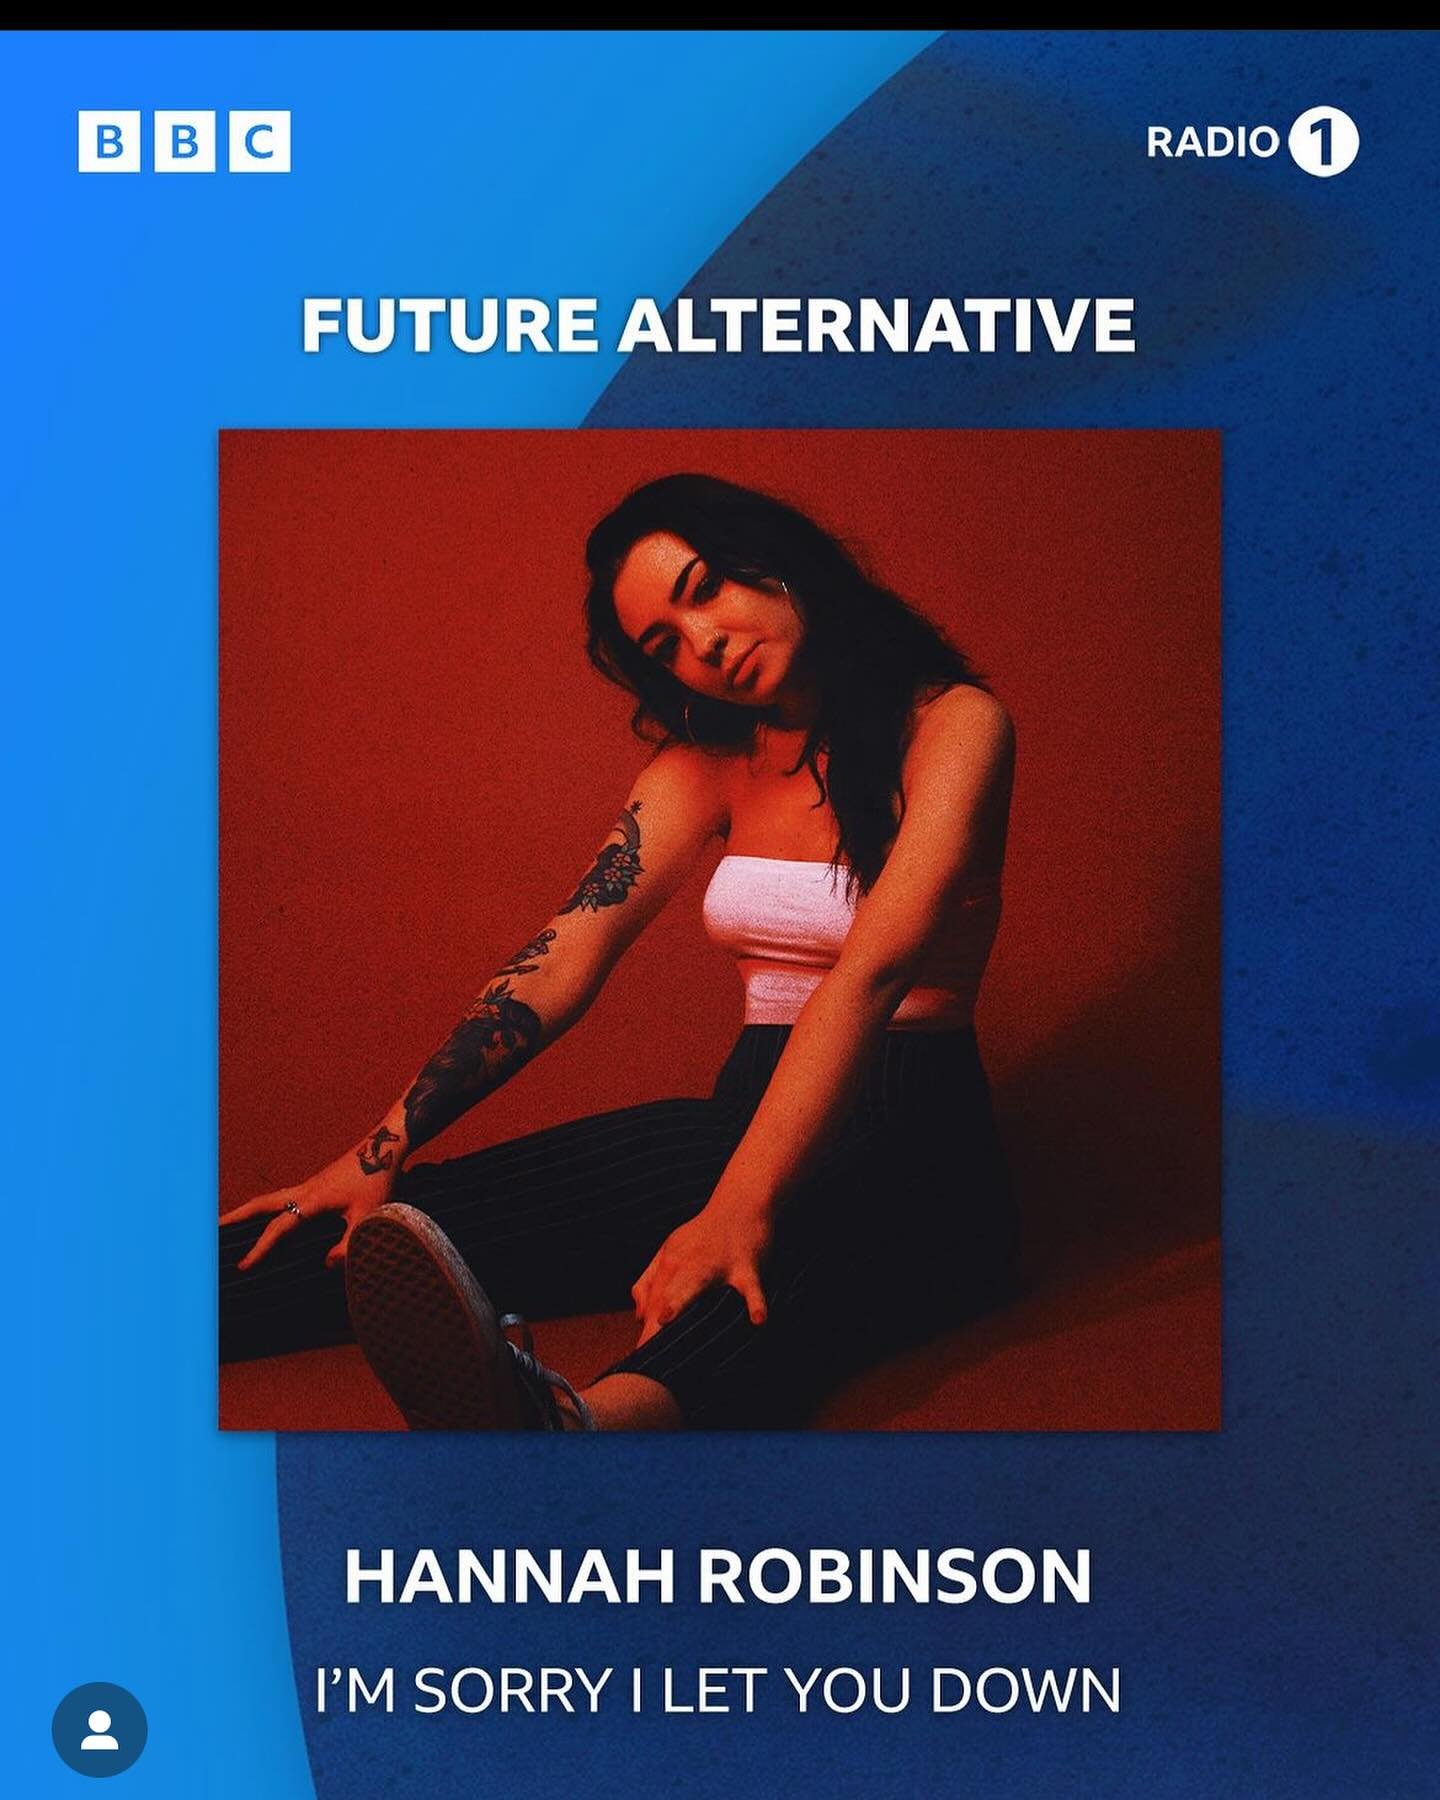 R A D I O  1 ❣️

Absolutely thrilled for our UK PR client @hannahrobinsonmusic_ getting her first @bbcradio1 spin tonight courtesy of @nelshylton 🥳 Be sure to tune in to Future Alternative tonight to catch the whole show.

Thank you as ever @nelshyl